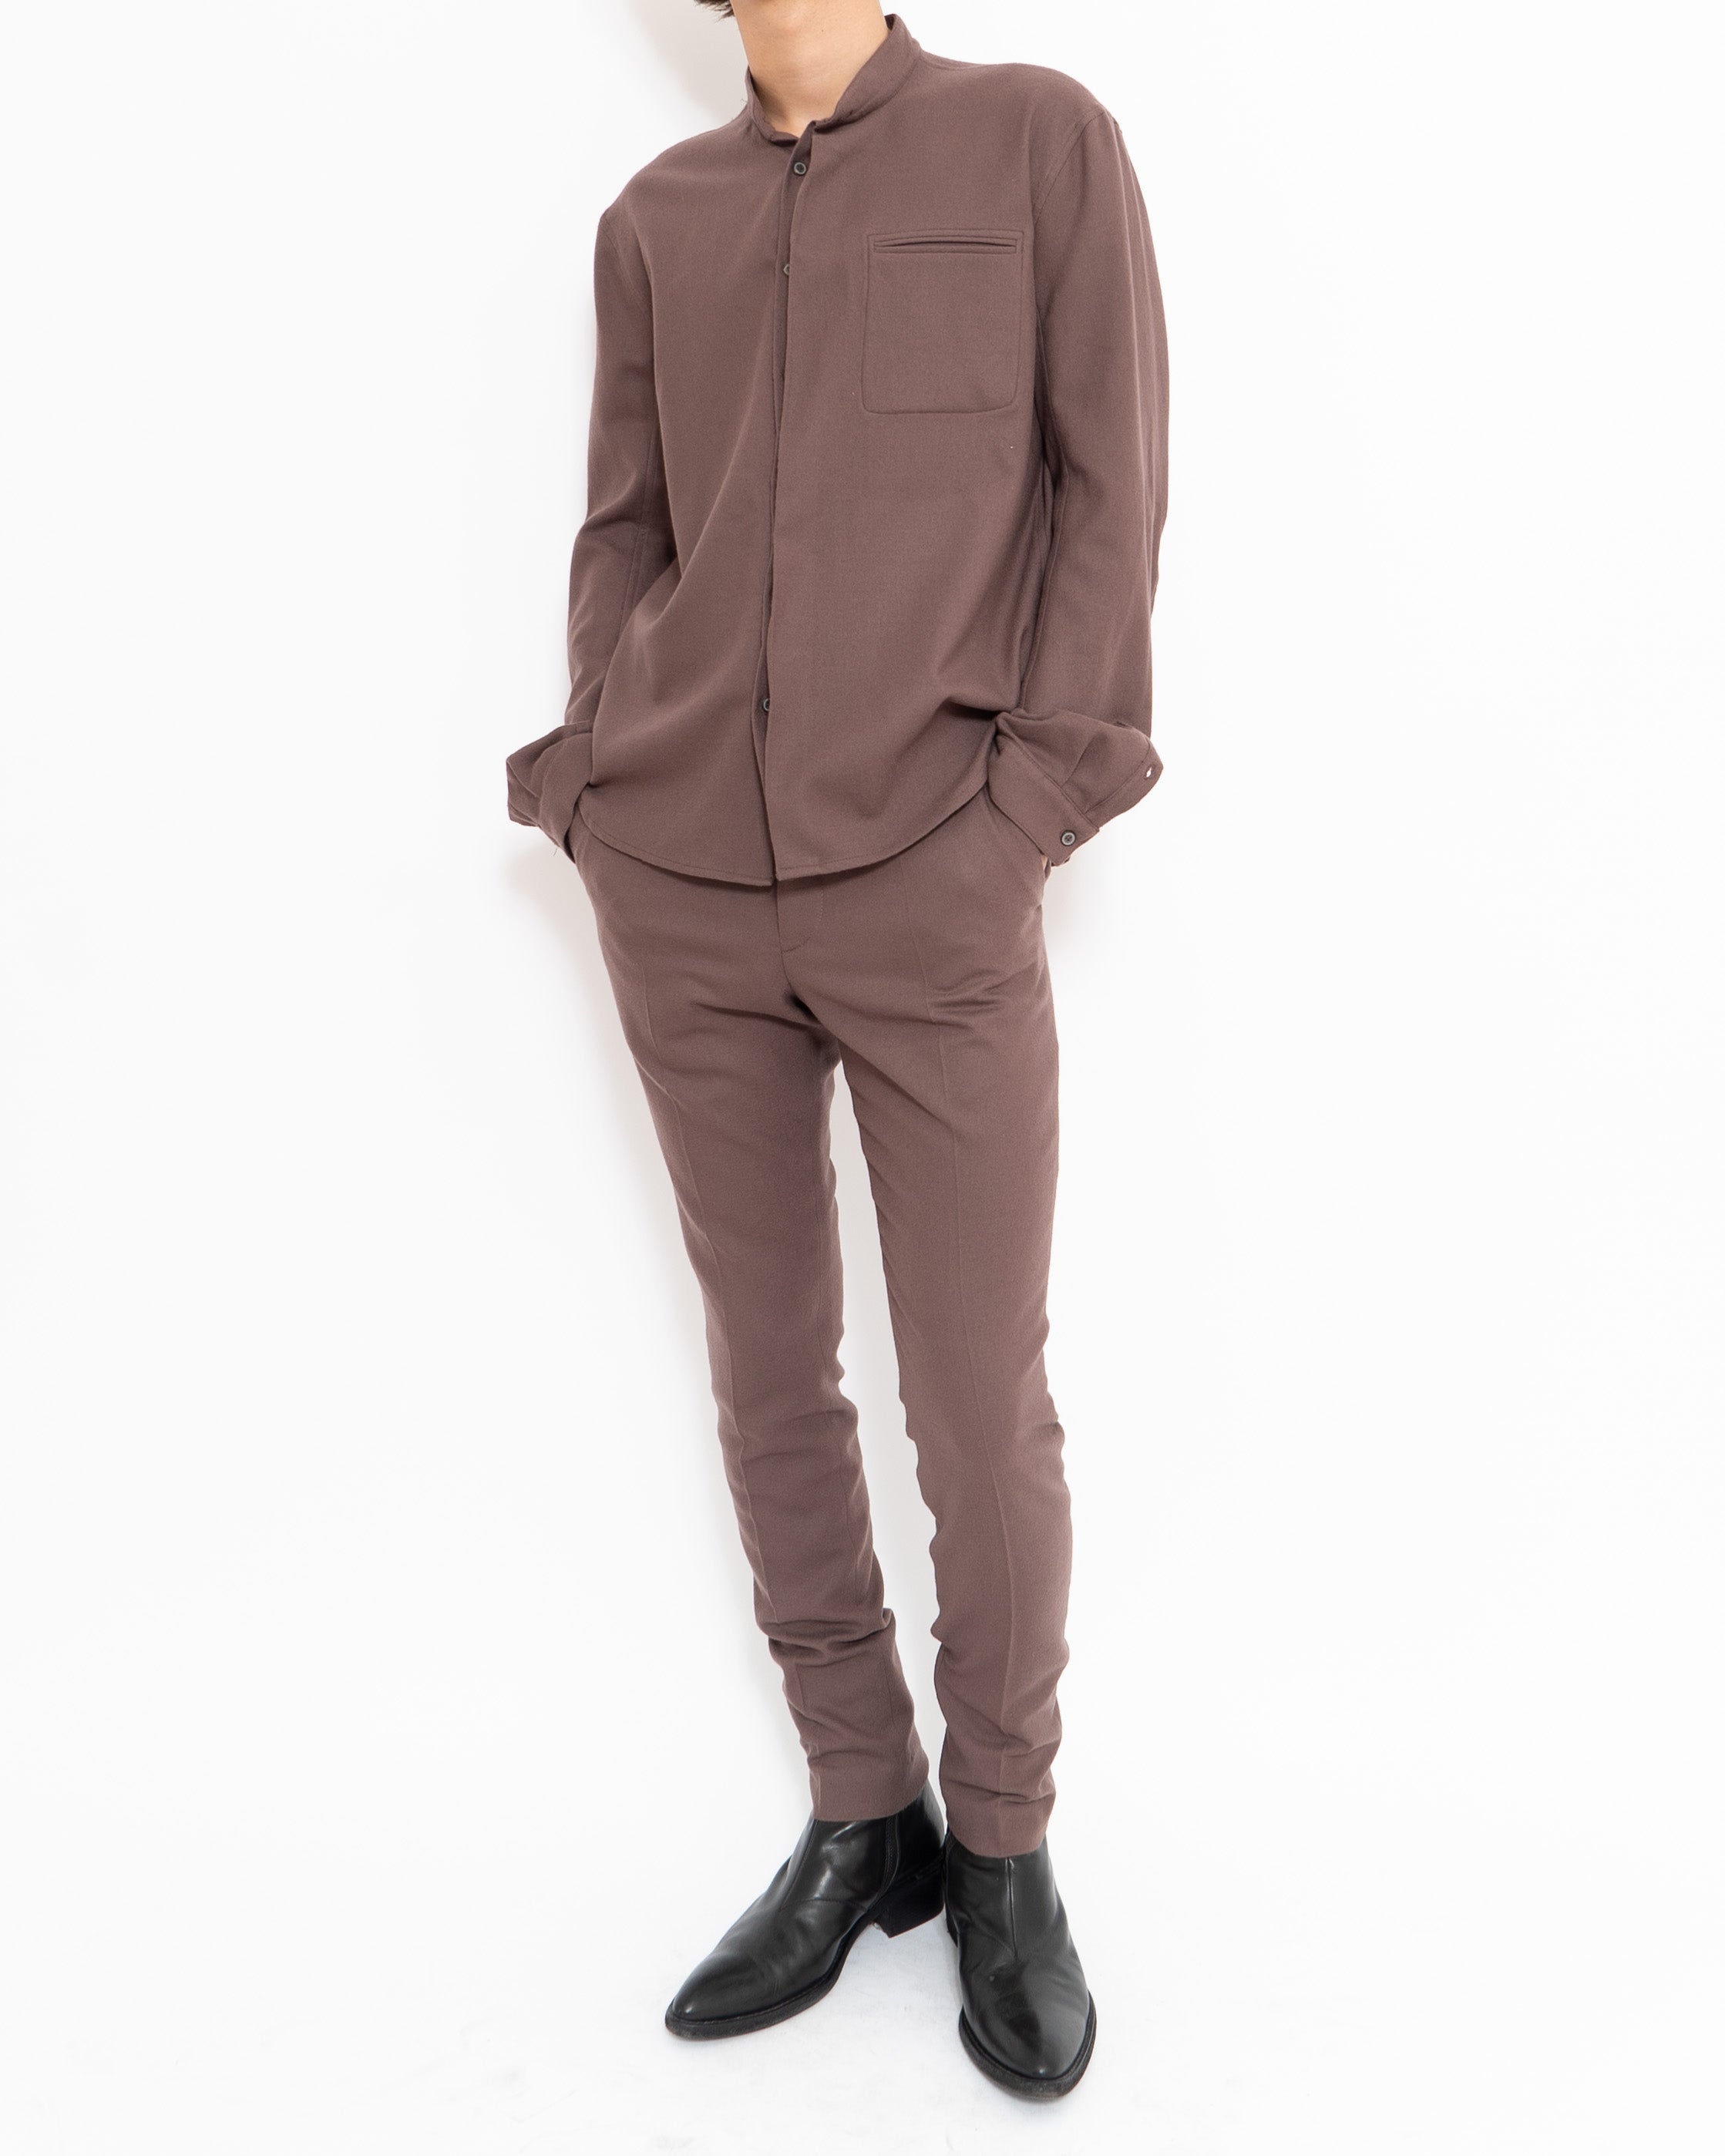 FW14 Calabria Dusty Rose Wool Trousers Sample